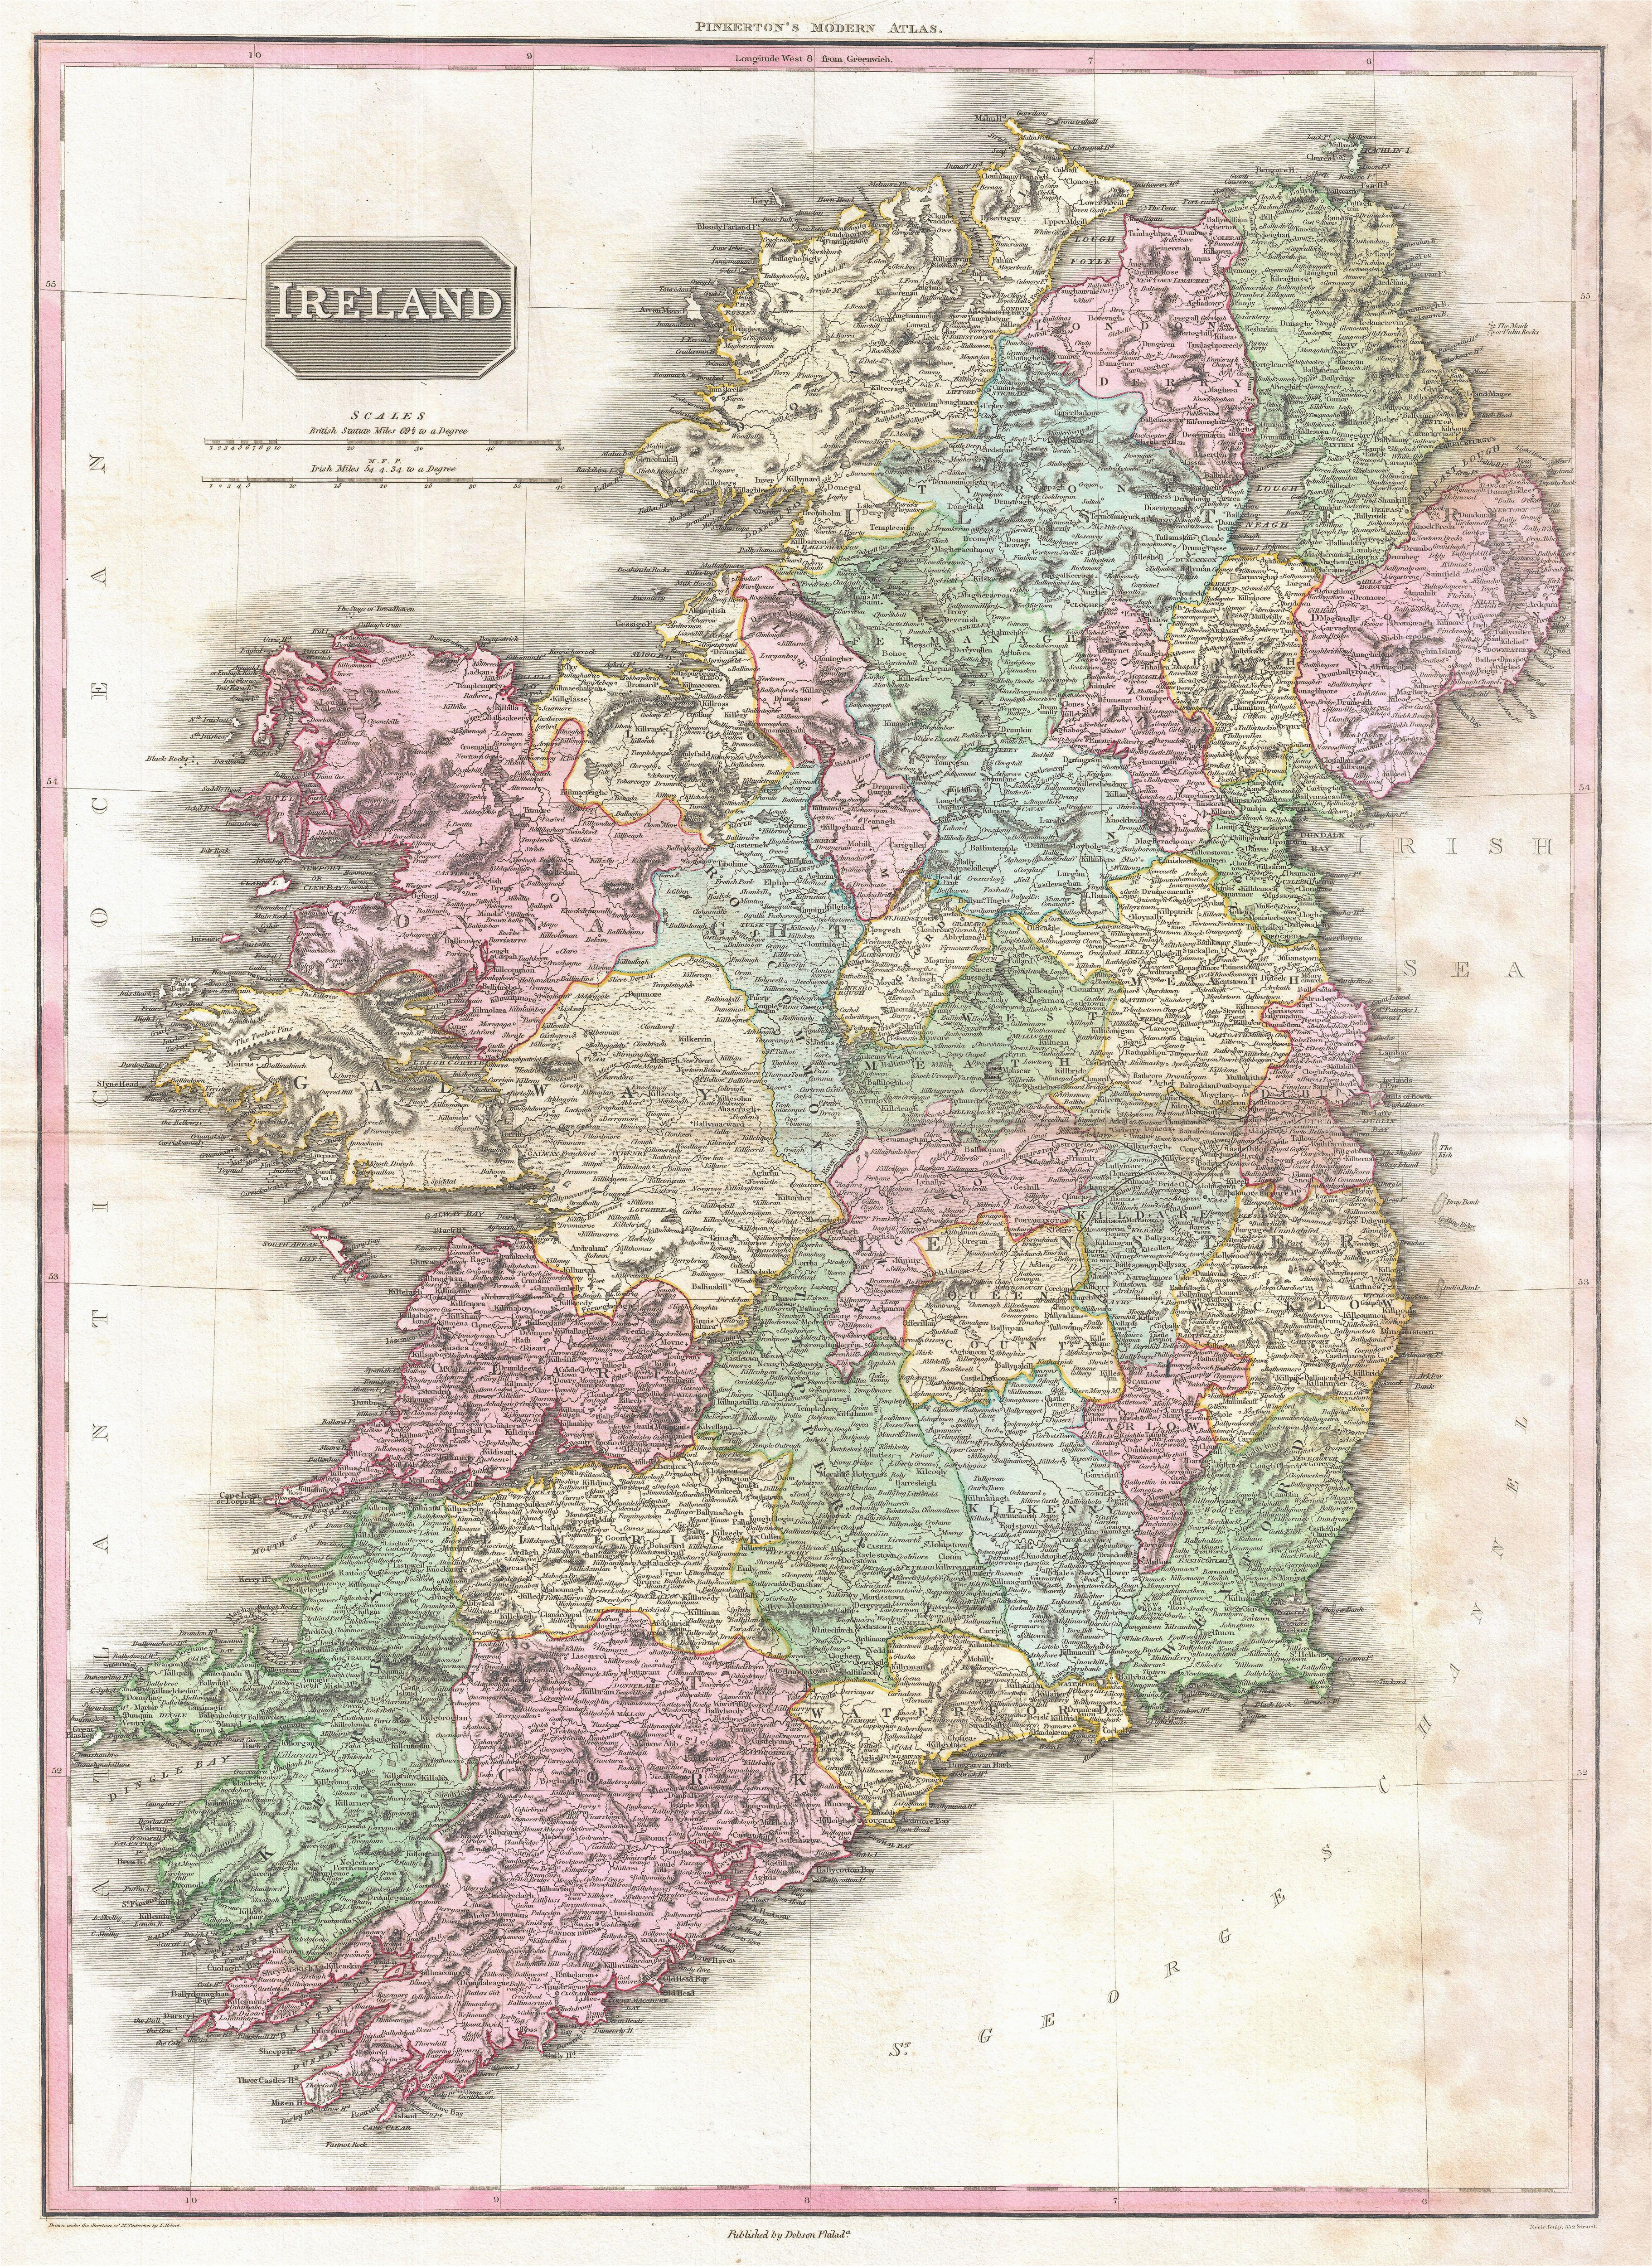 Map Of Mountains In Ireland File 1818 Pinkerton Map Of Ireland Geographicus Ireland